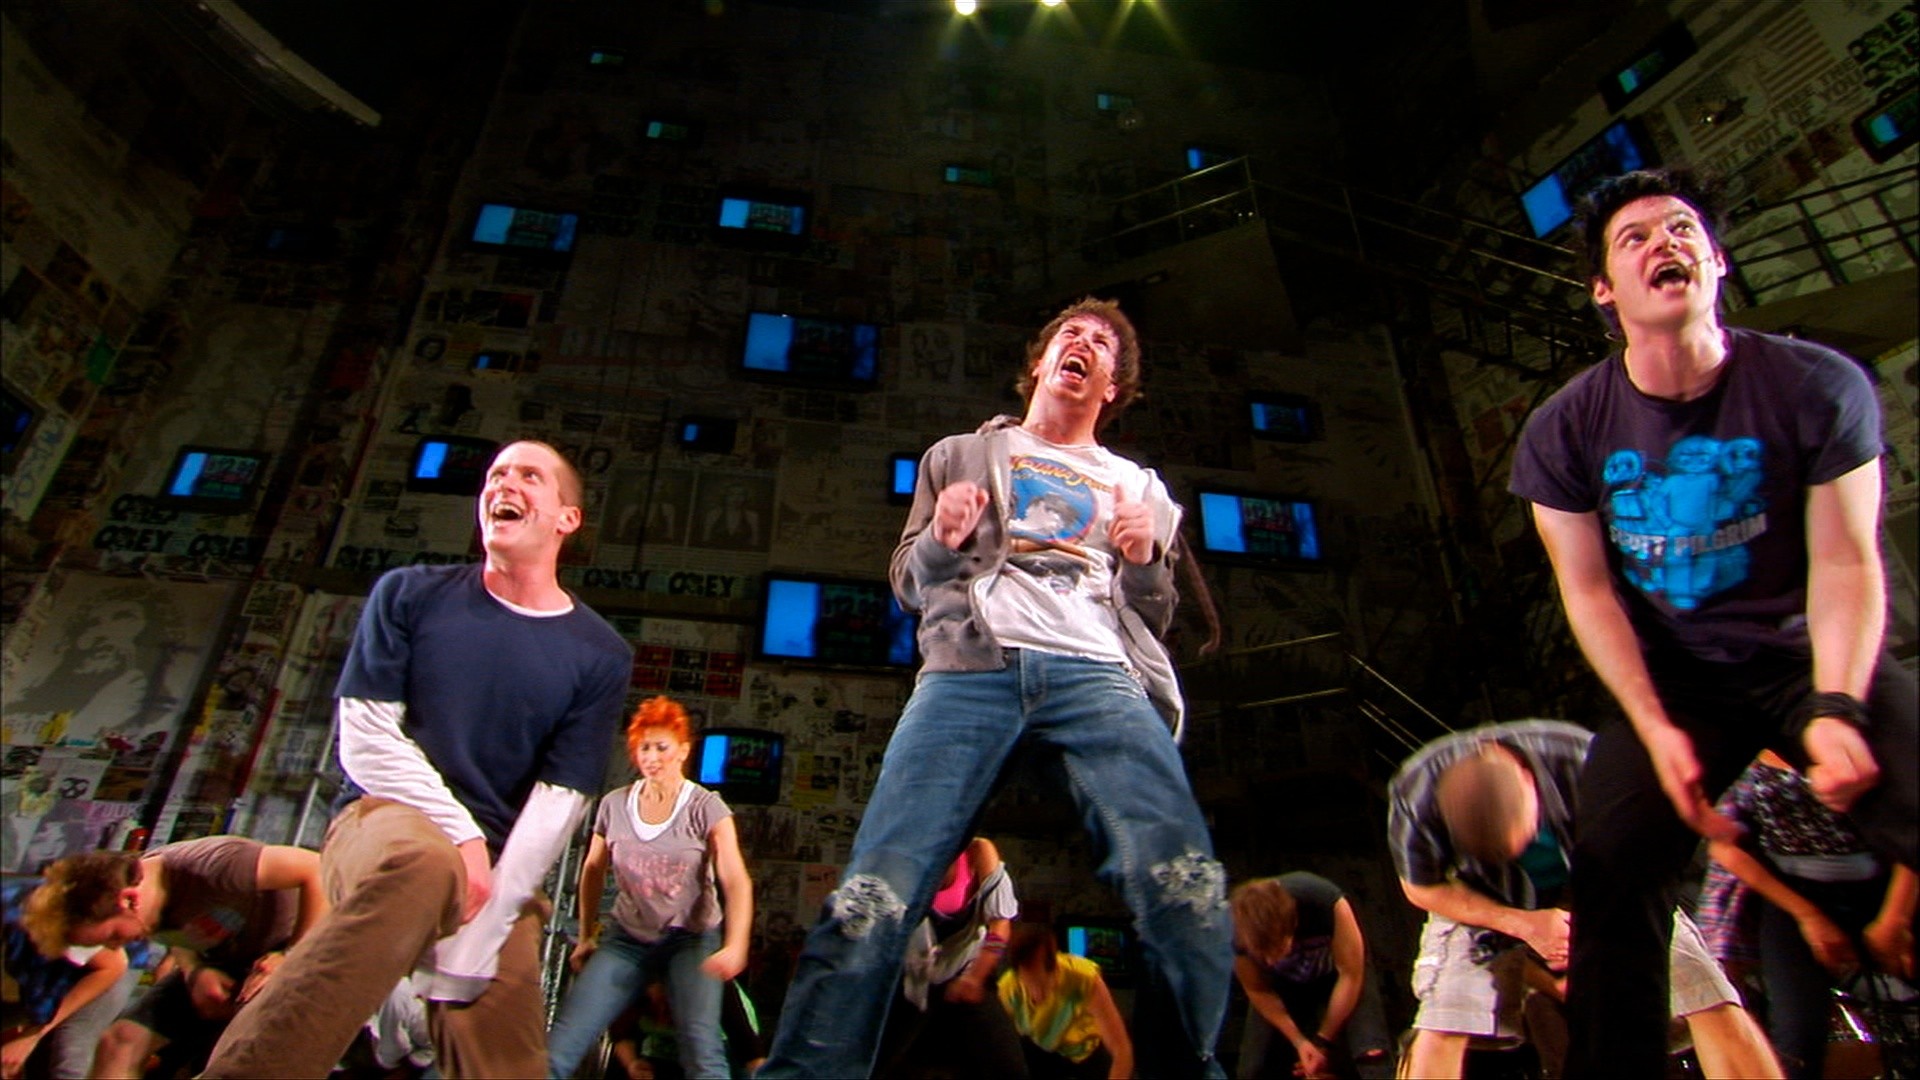 A scene from FilmBuff's Broadway Idiot (2013)